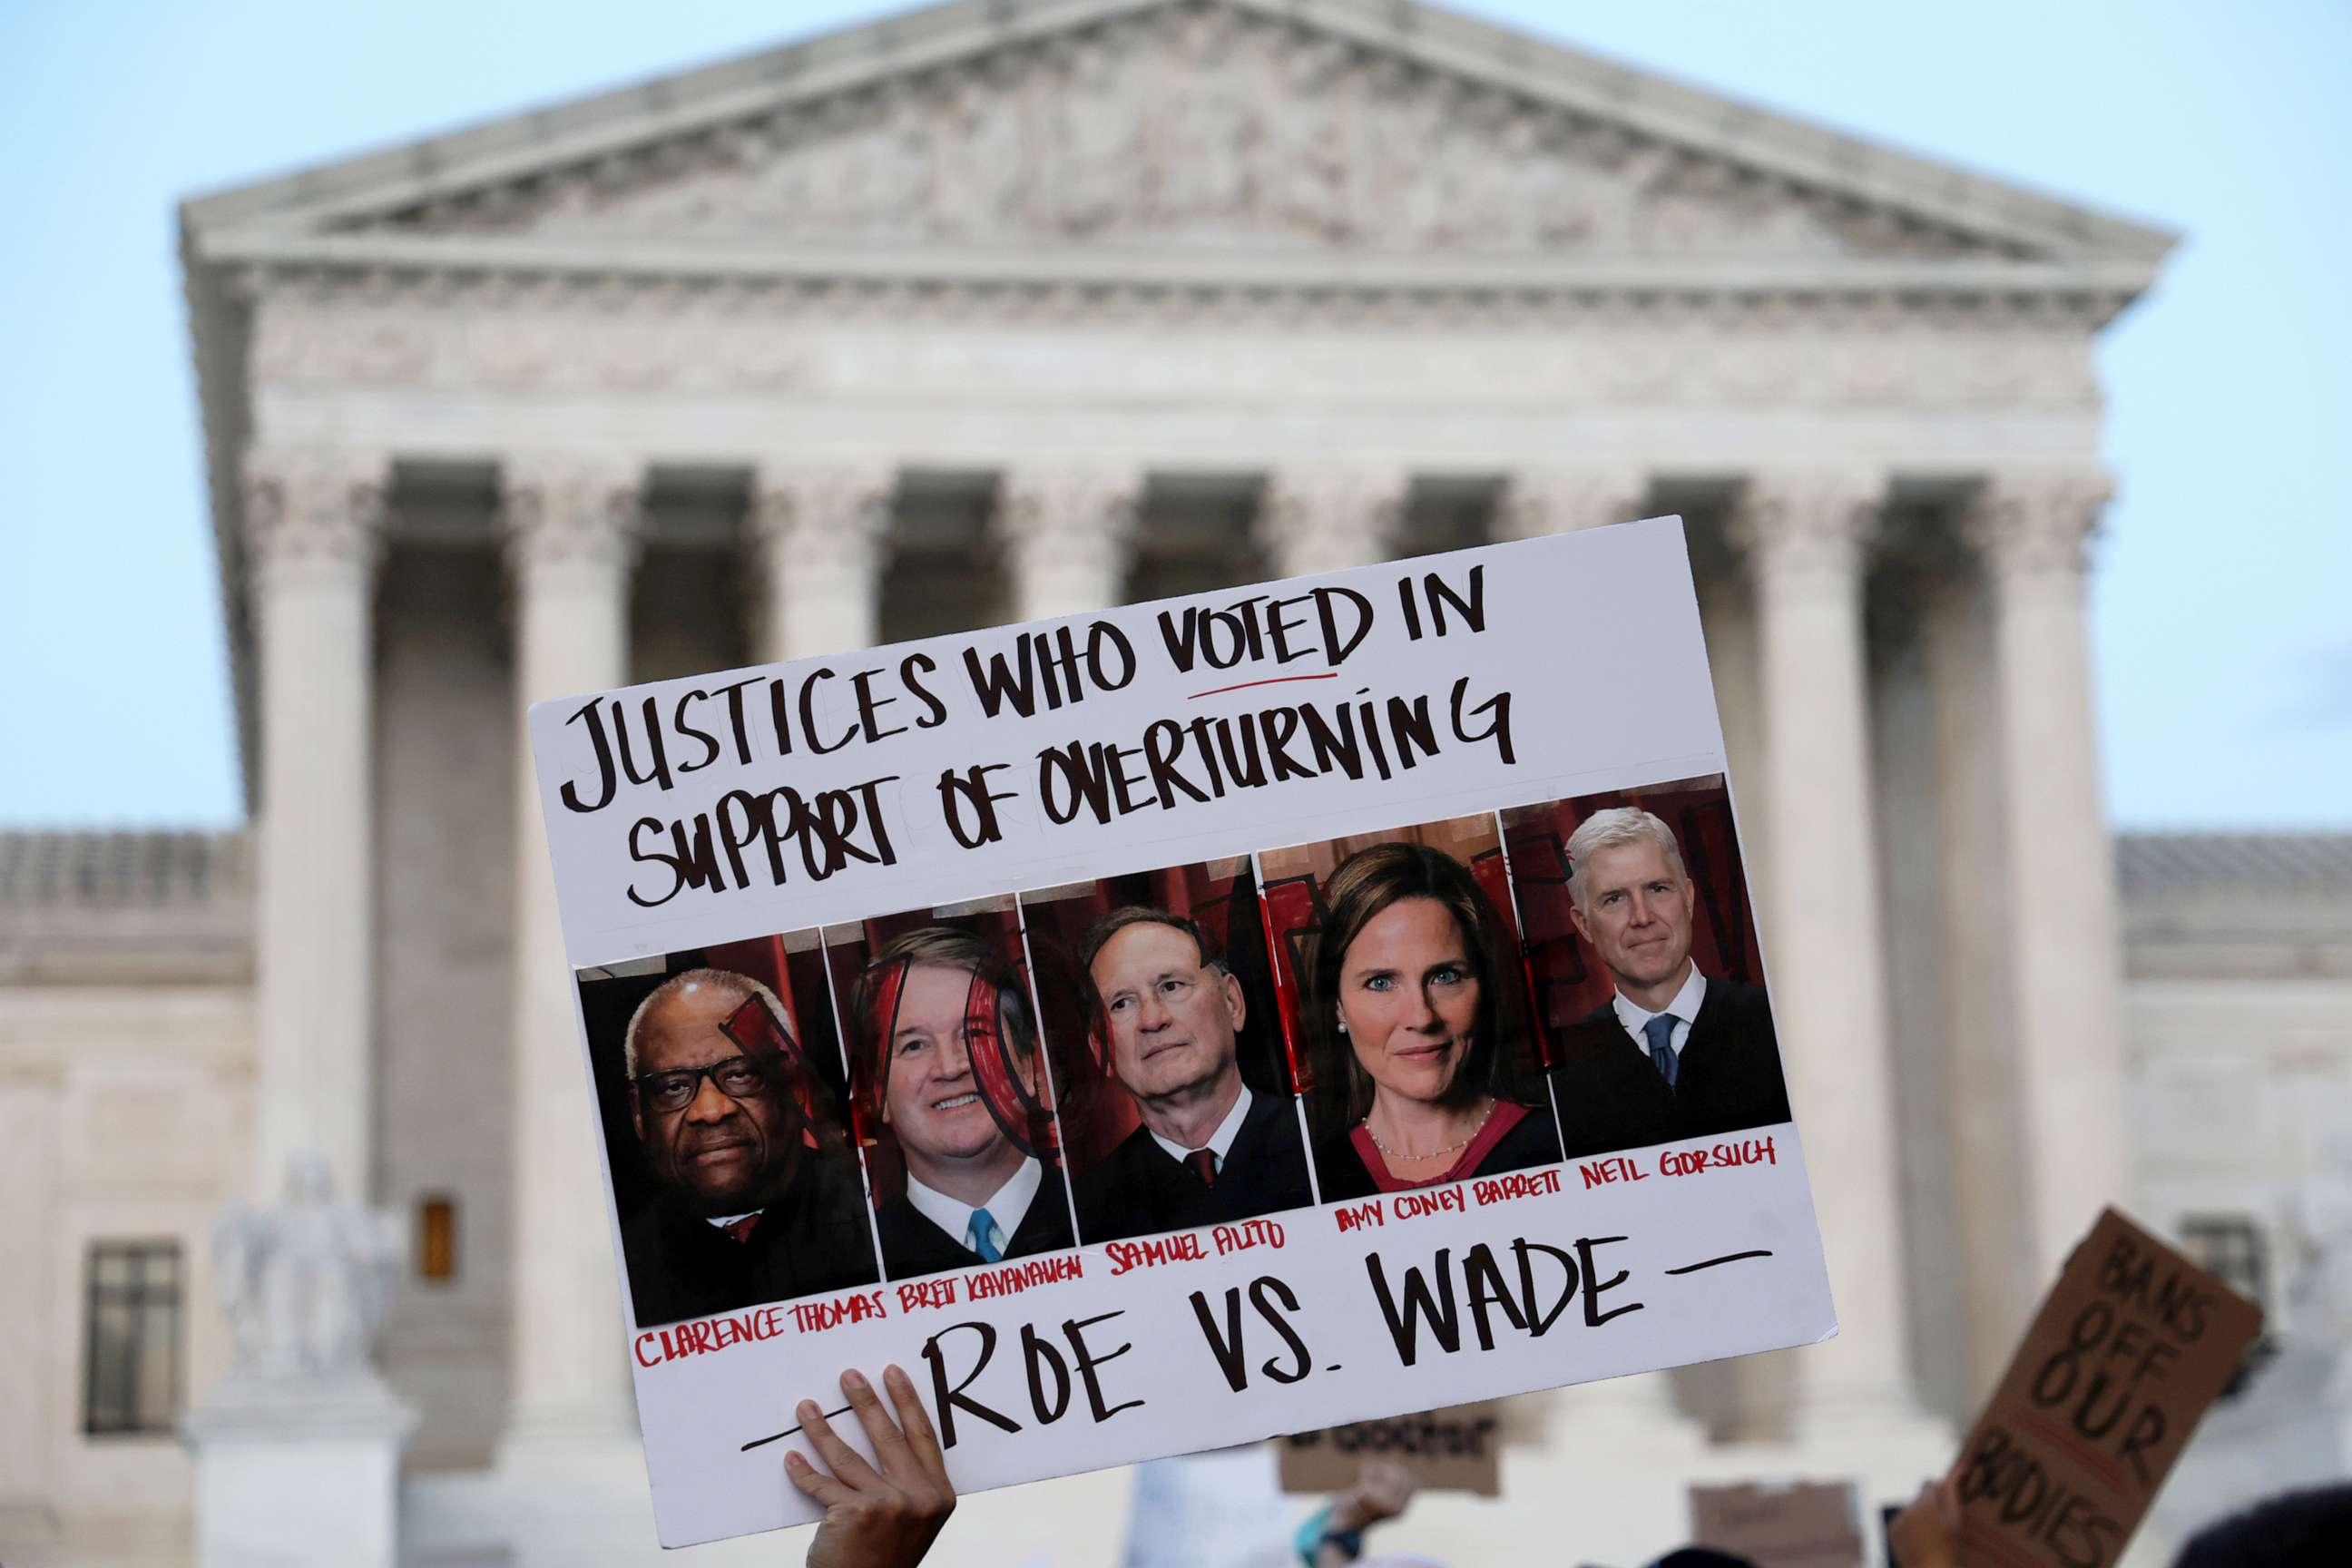 PHOTO: A pro-choice activist holds up a sign during a rally in front of the Supreme Court in response to the leaked Supreme Court draft decision to overturn Roe v. Wade, May 3, 2022 in Washington, DC.